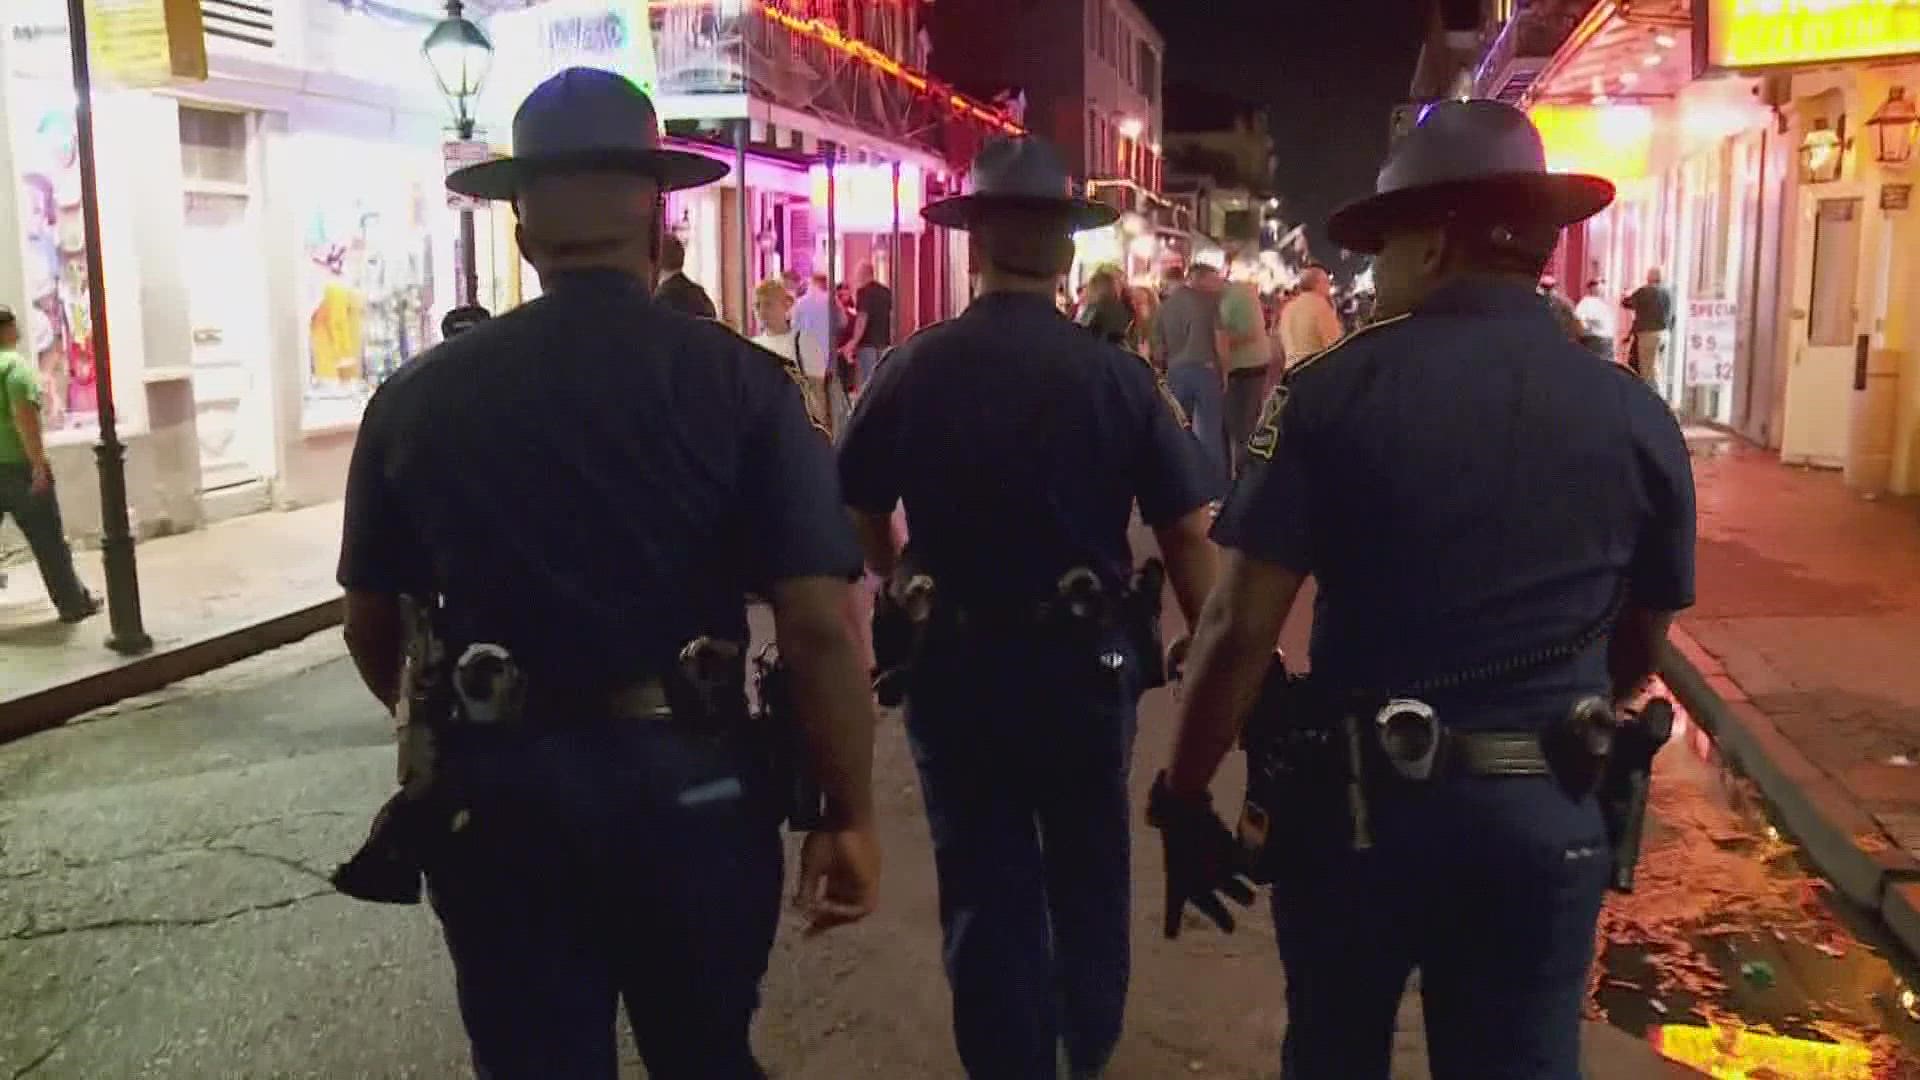 The city will get help from State Police, but there will be a decrease in manpower due to police staffing shortage for both the NOPD and State Police.